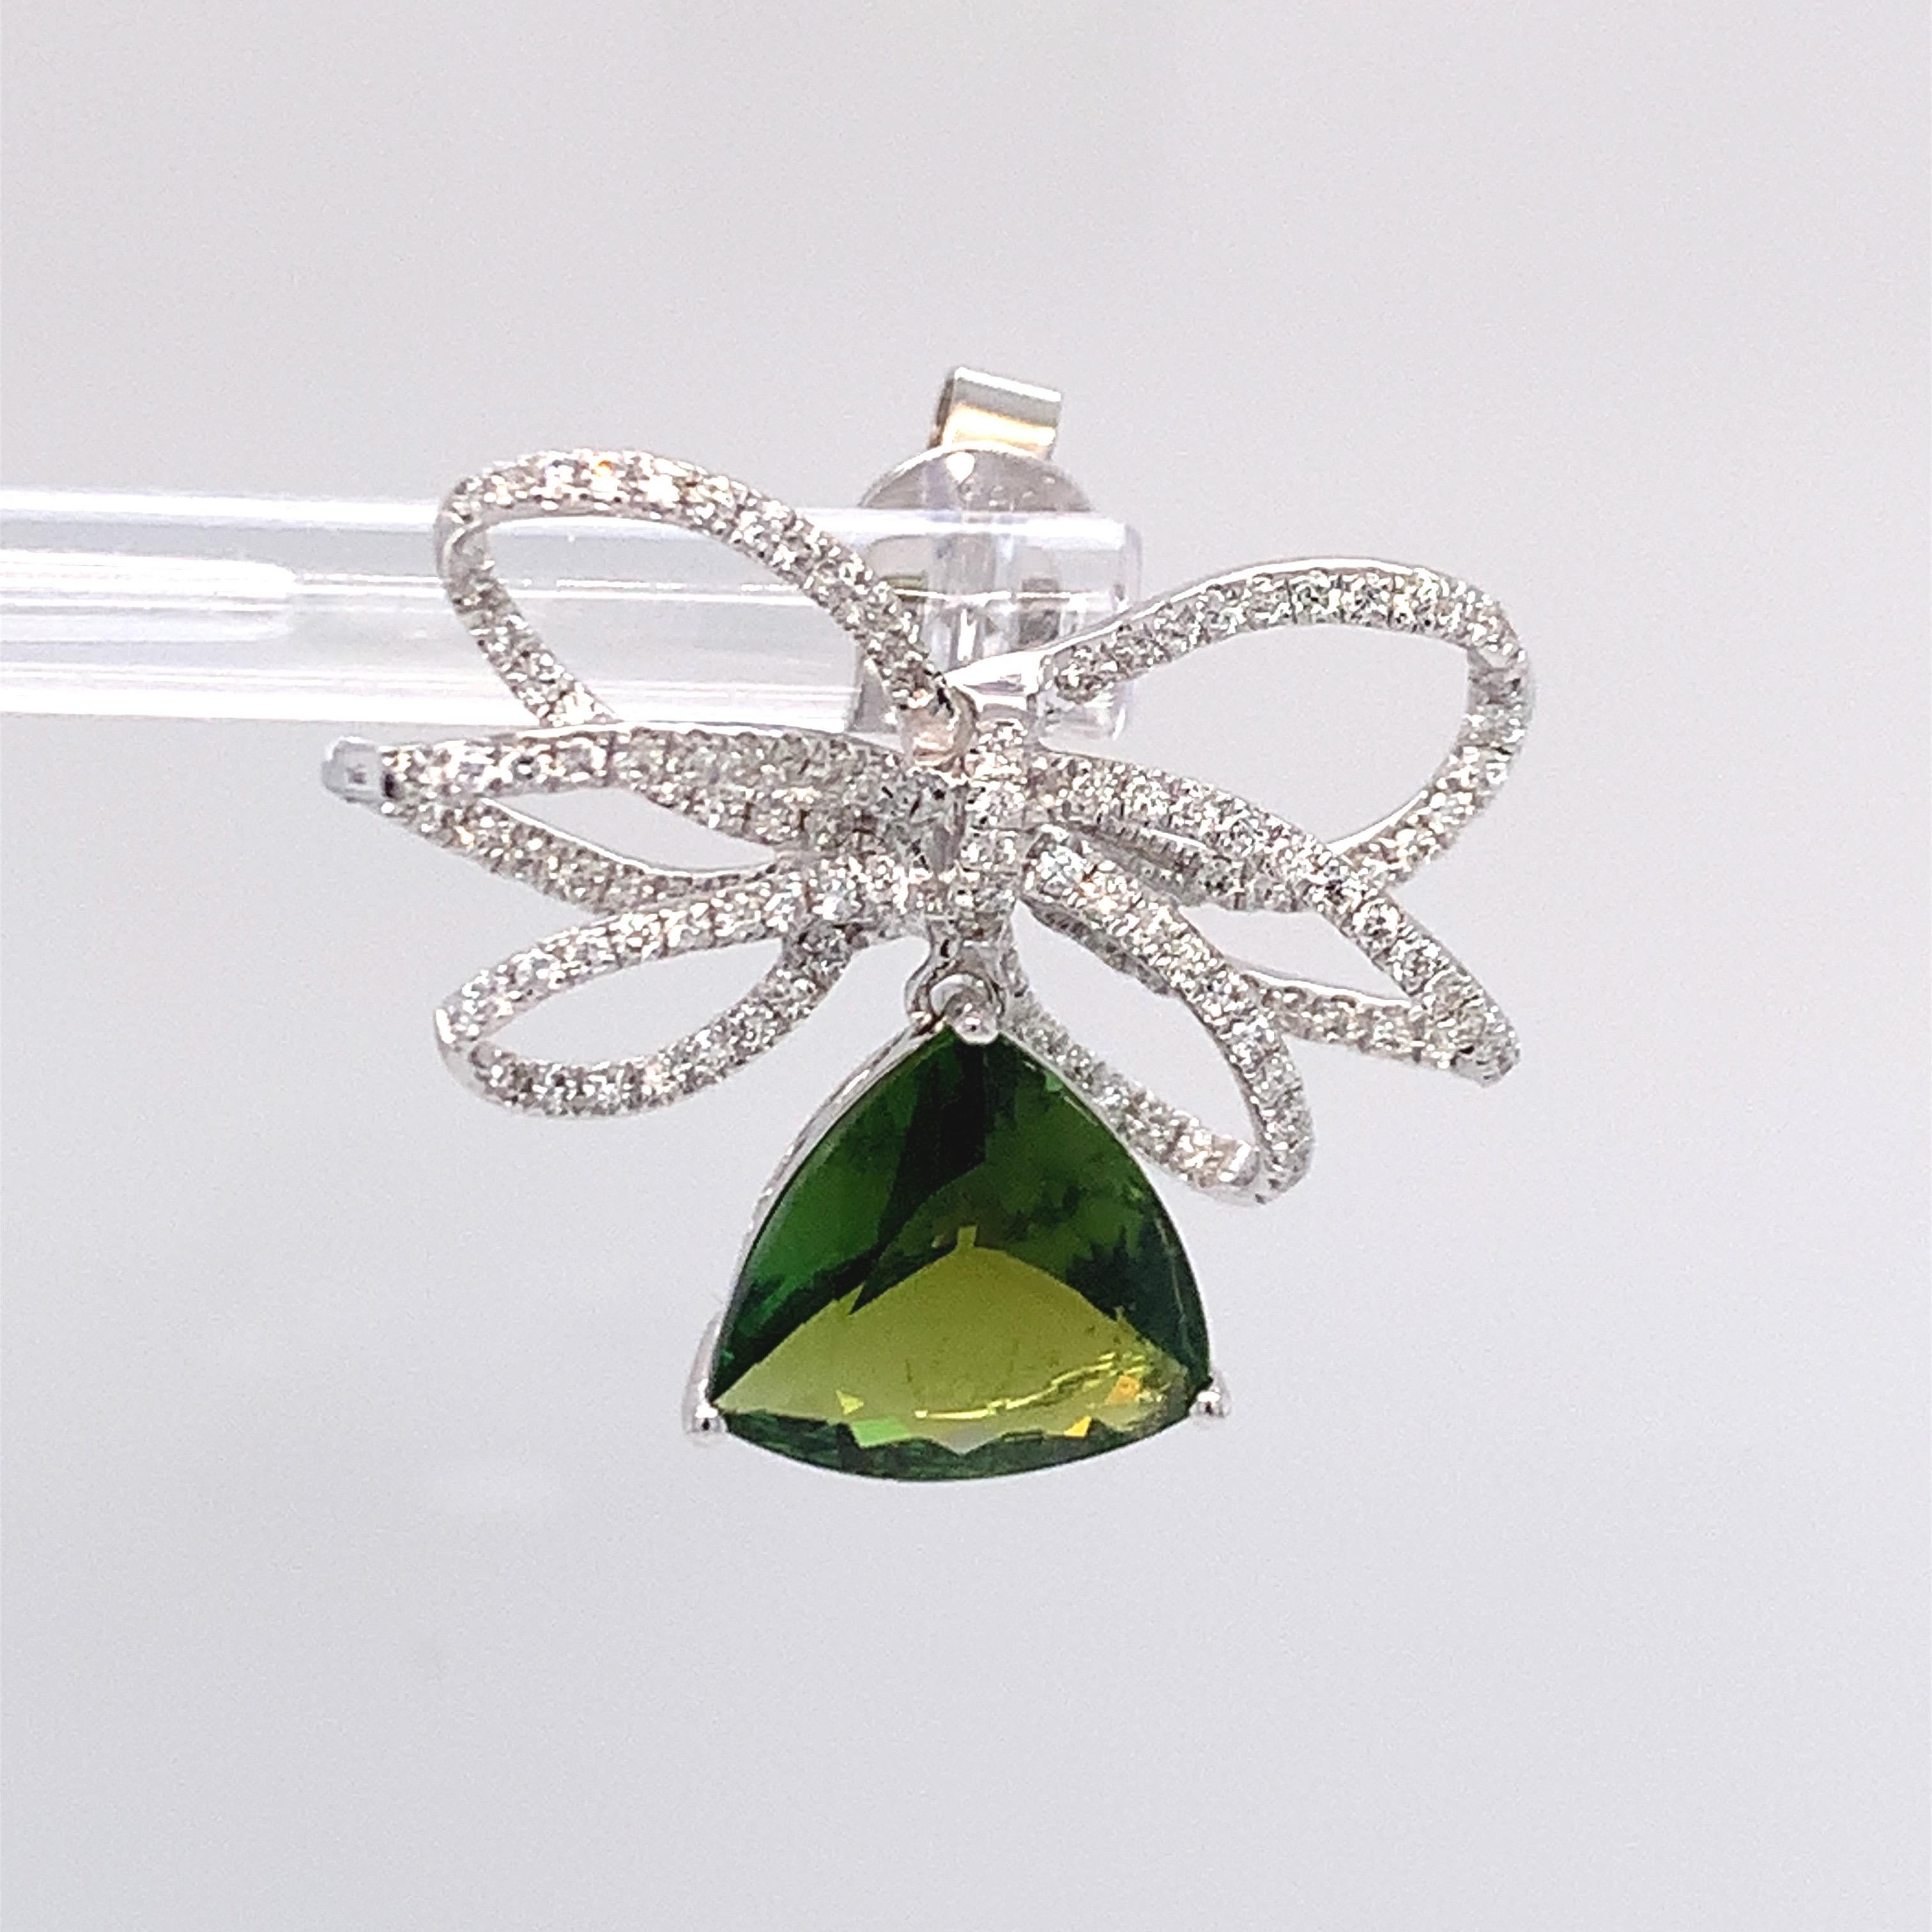 This magnificent dangling earrings boasts a trillion cut green tourmaline with white diamonds. Elegant and modern design, set in white gold makes it a stunning piece. Carefully finished with hand by skilled artisans.
Green Tourmaline: 6.93ct
White